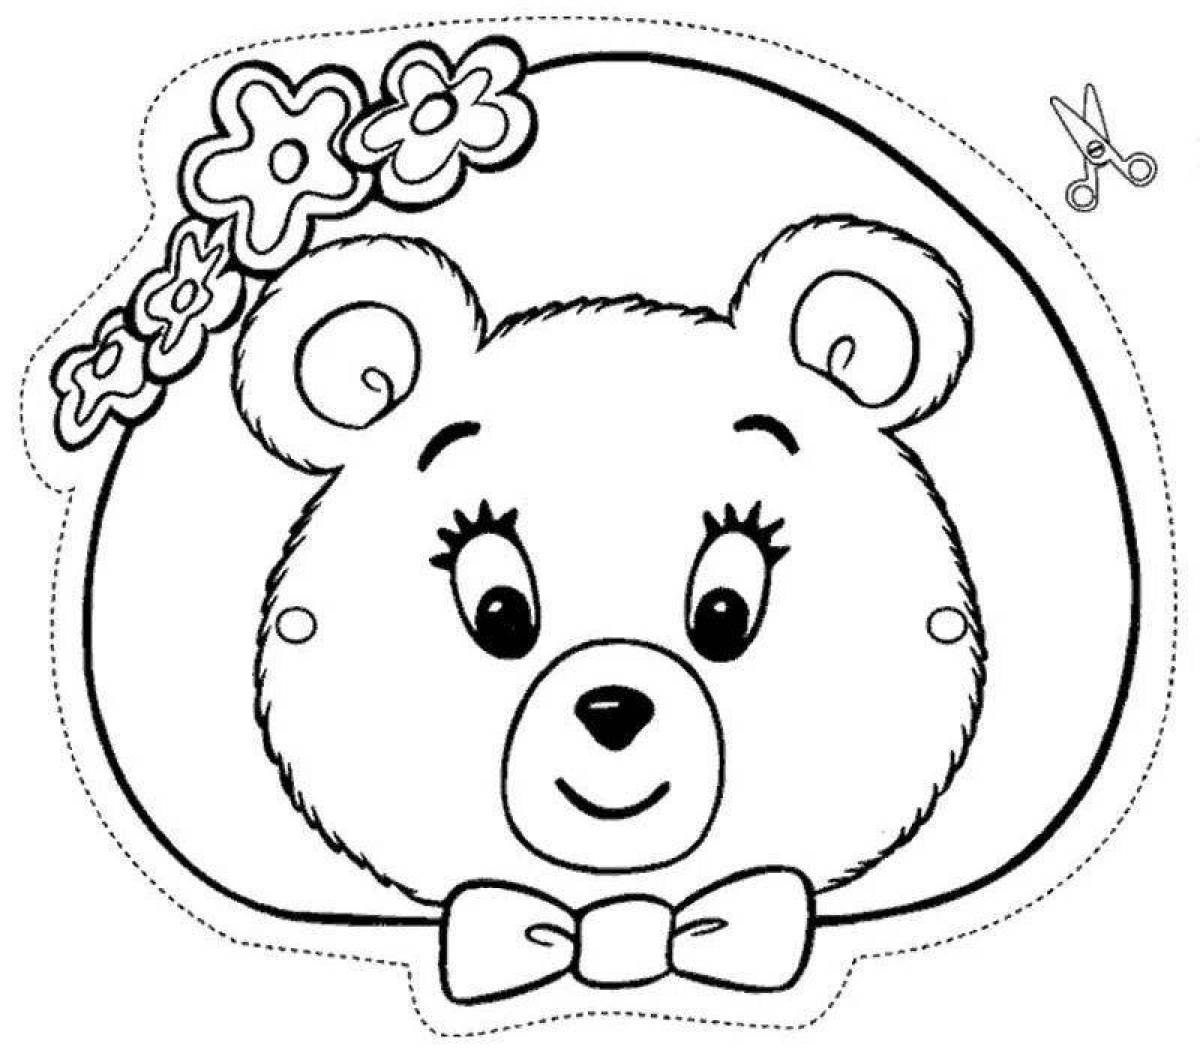 Gorgeous bear head coloring page